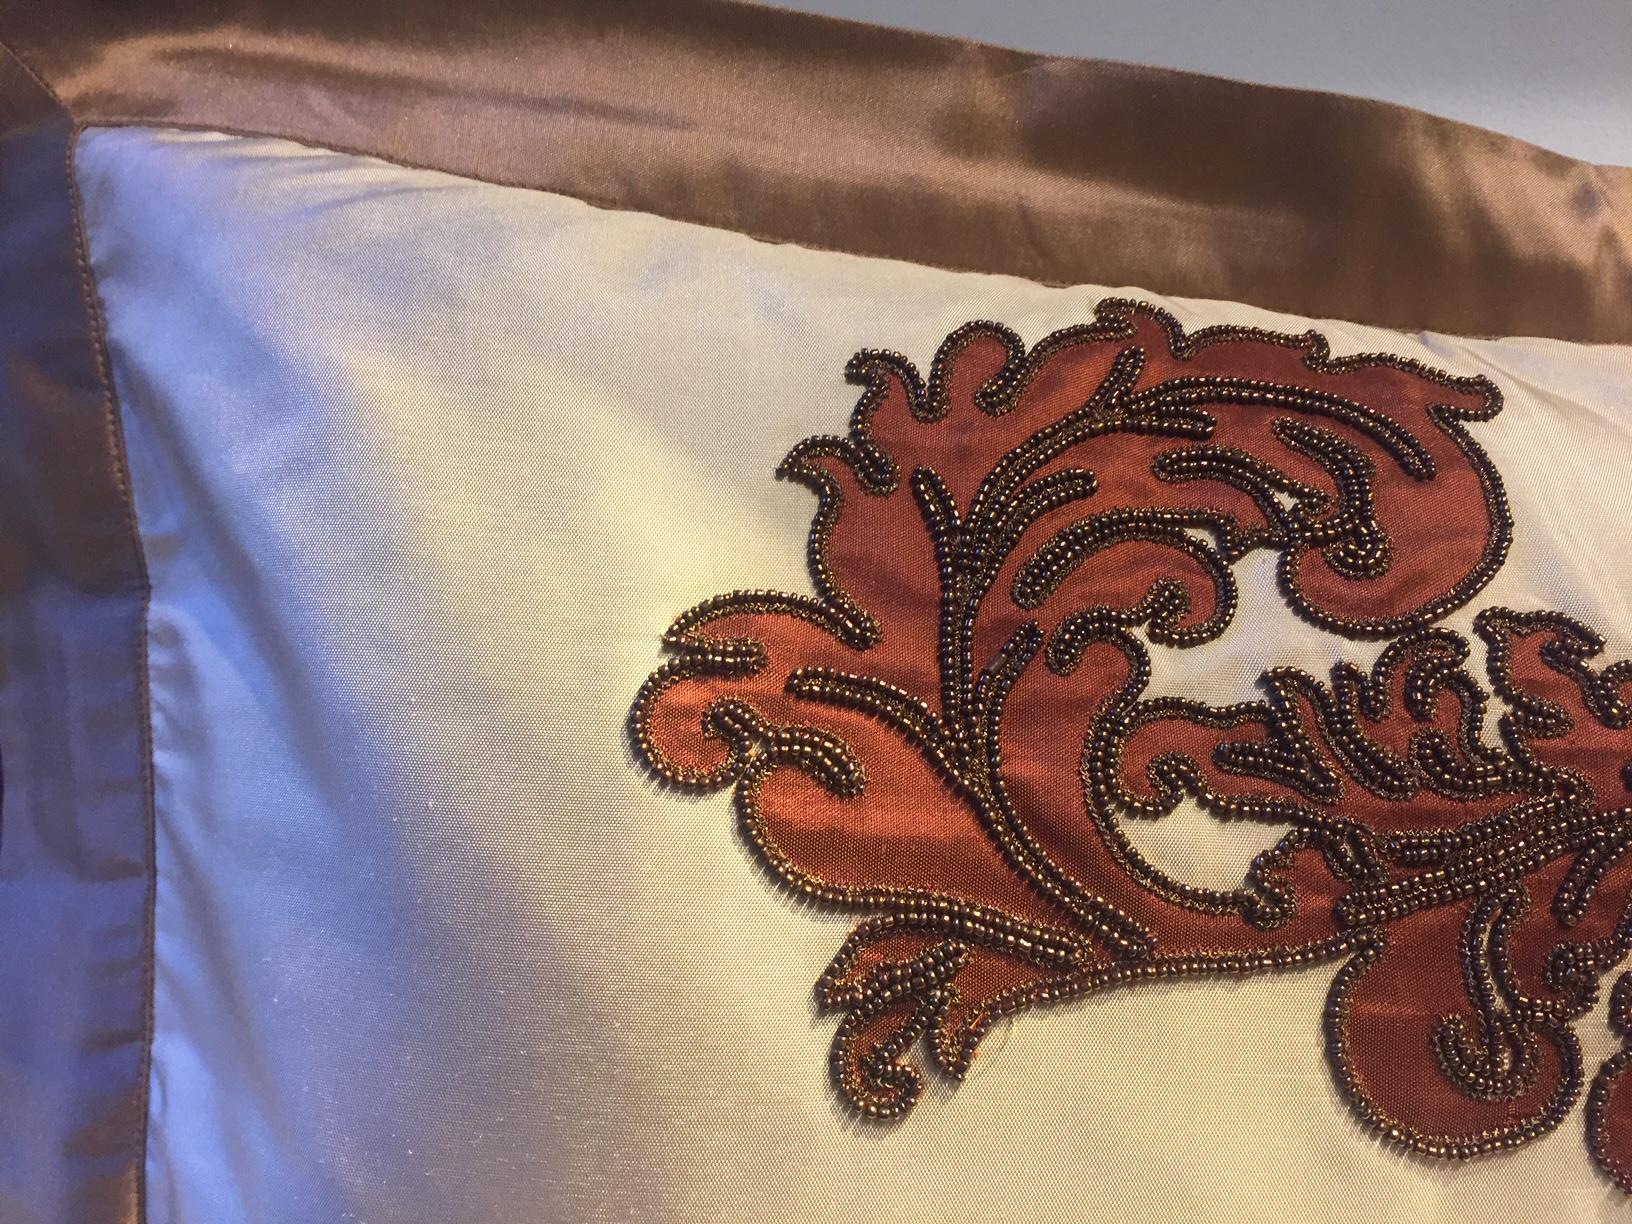 Cushions cinnamon silk with modern damask design hand embroidery and appliqué work with beading color copper
Oxford trim detail 4cm wide
Cotton lining
Feather pad
Size: 54 x 38 cm includes trim.